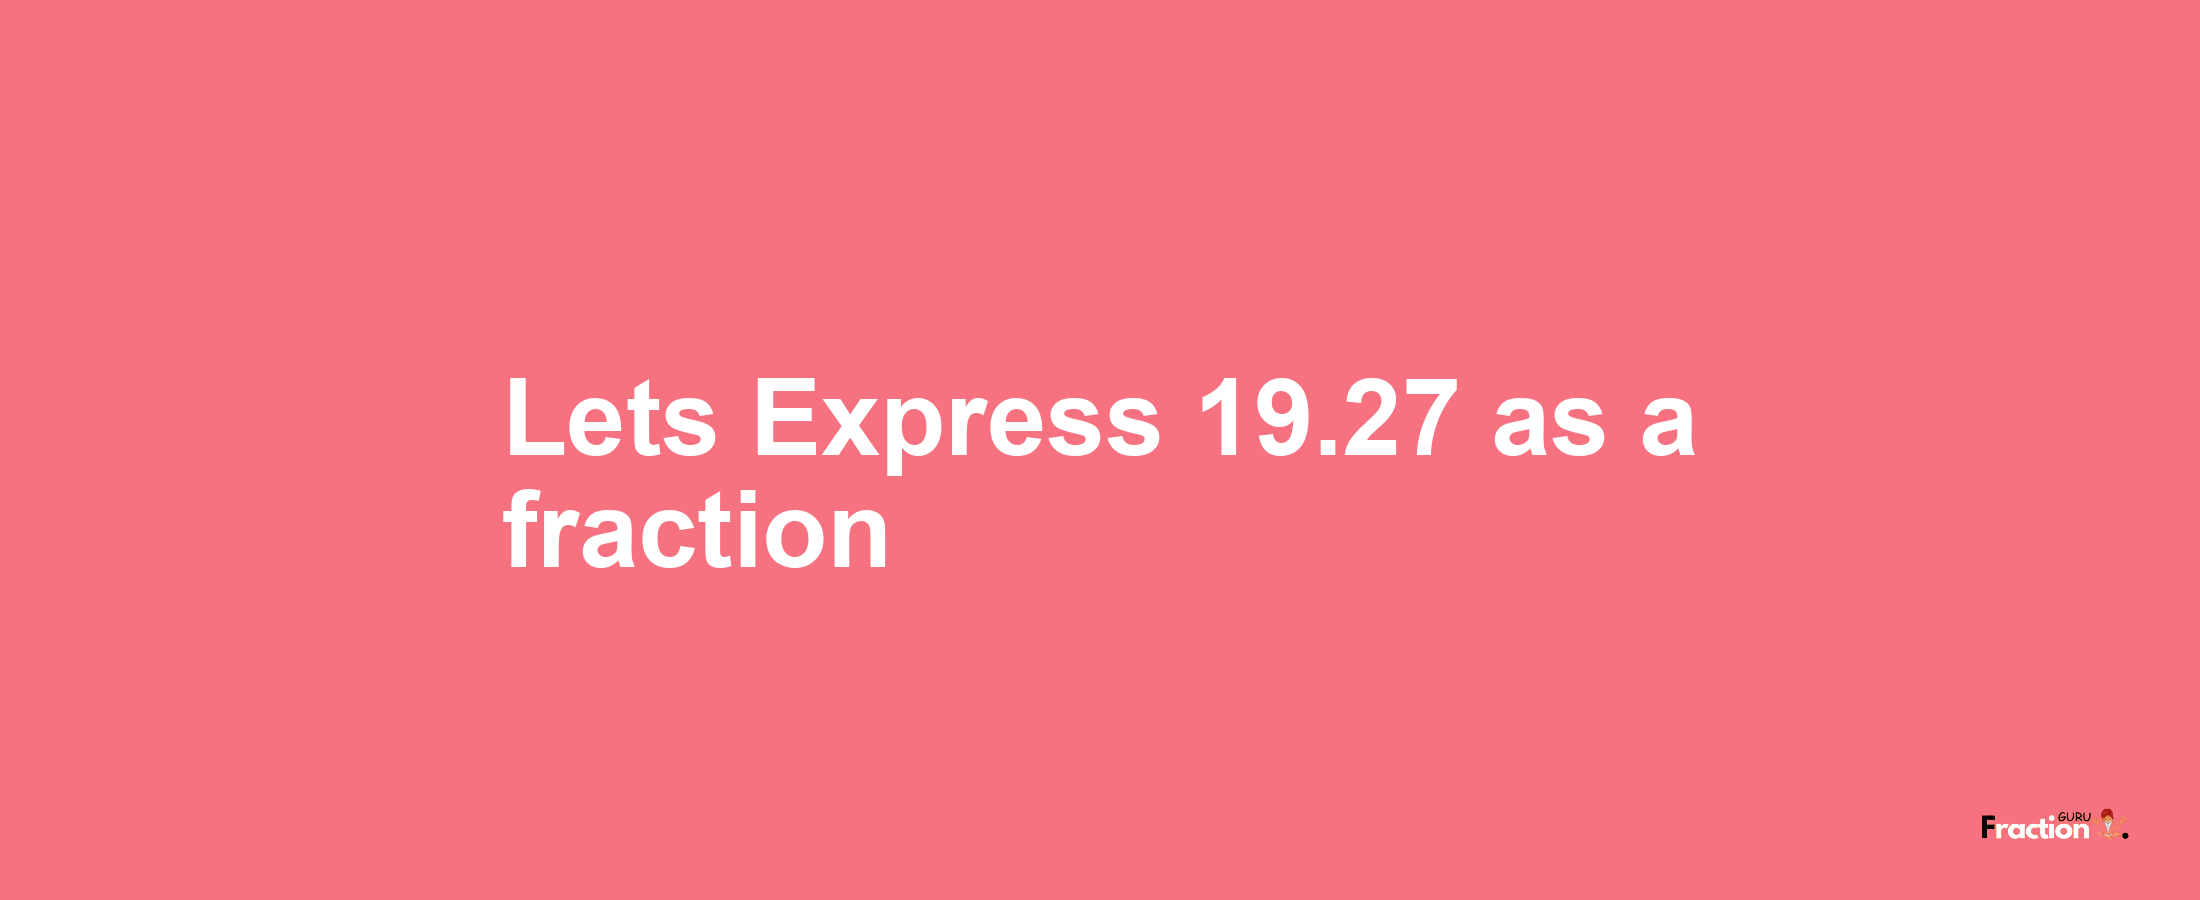 Lets Express 19.27 as afraction